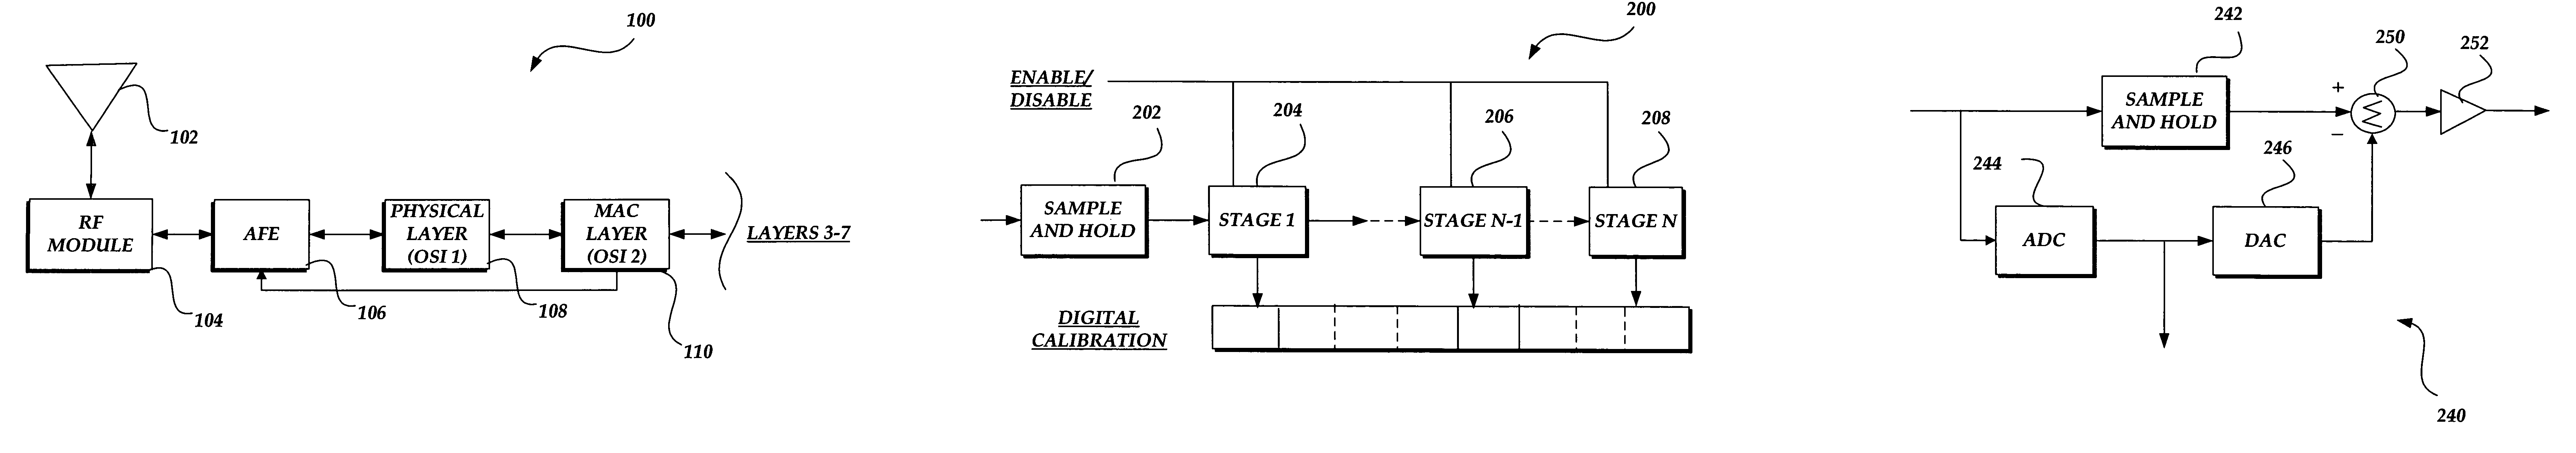 Pipelined analog to digital converter that is configurable based on wireless communication protocol